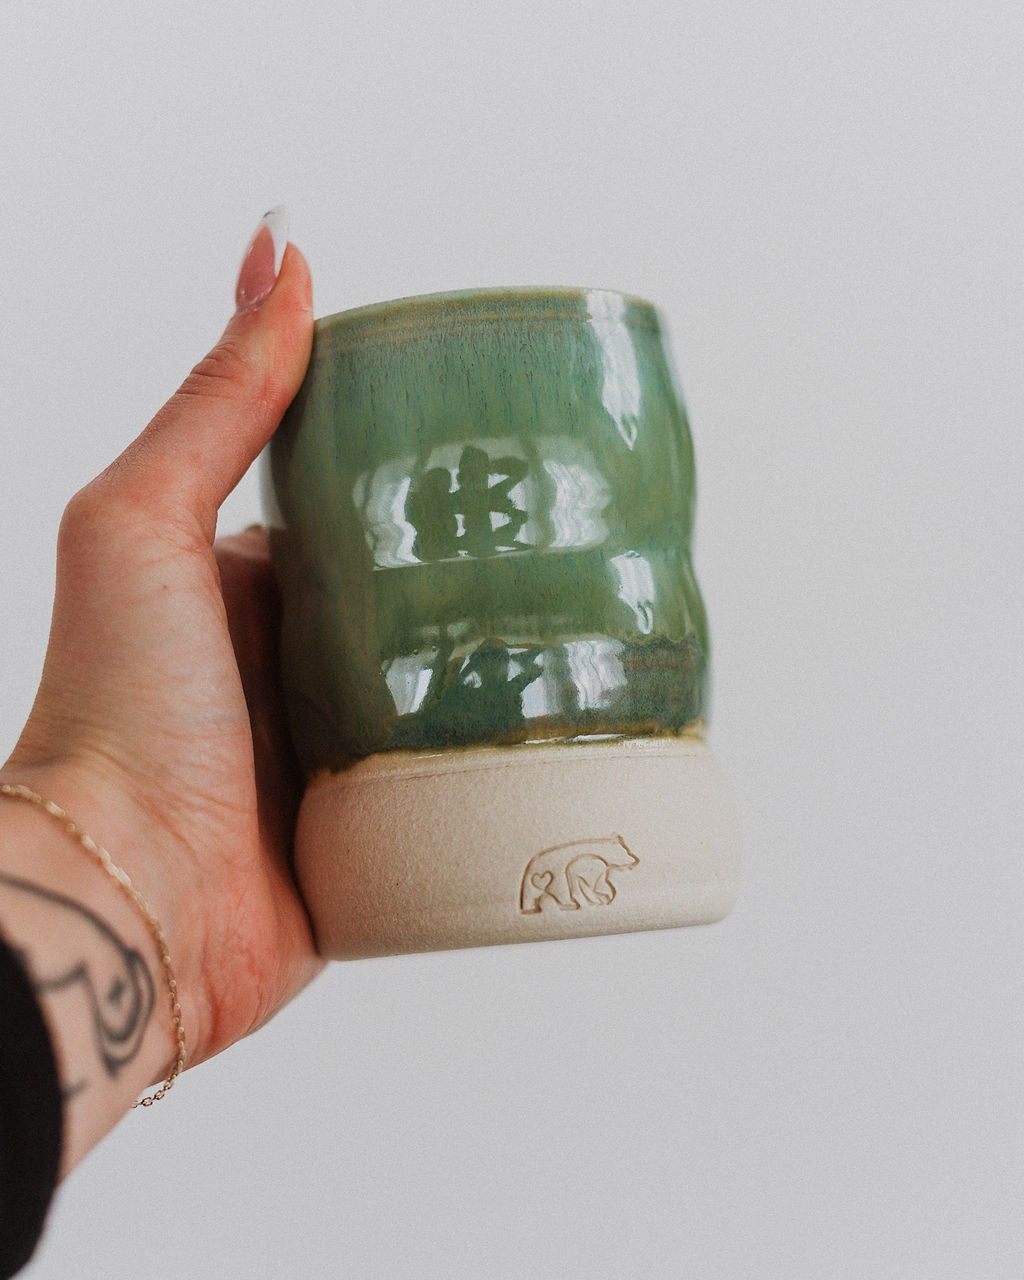 A hand holding a green ceramic candle vessel.